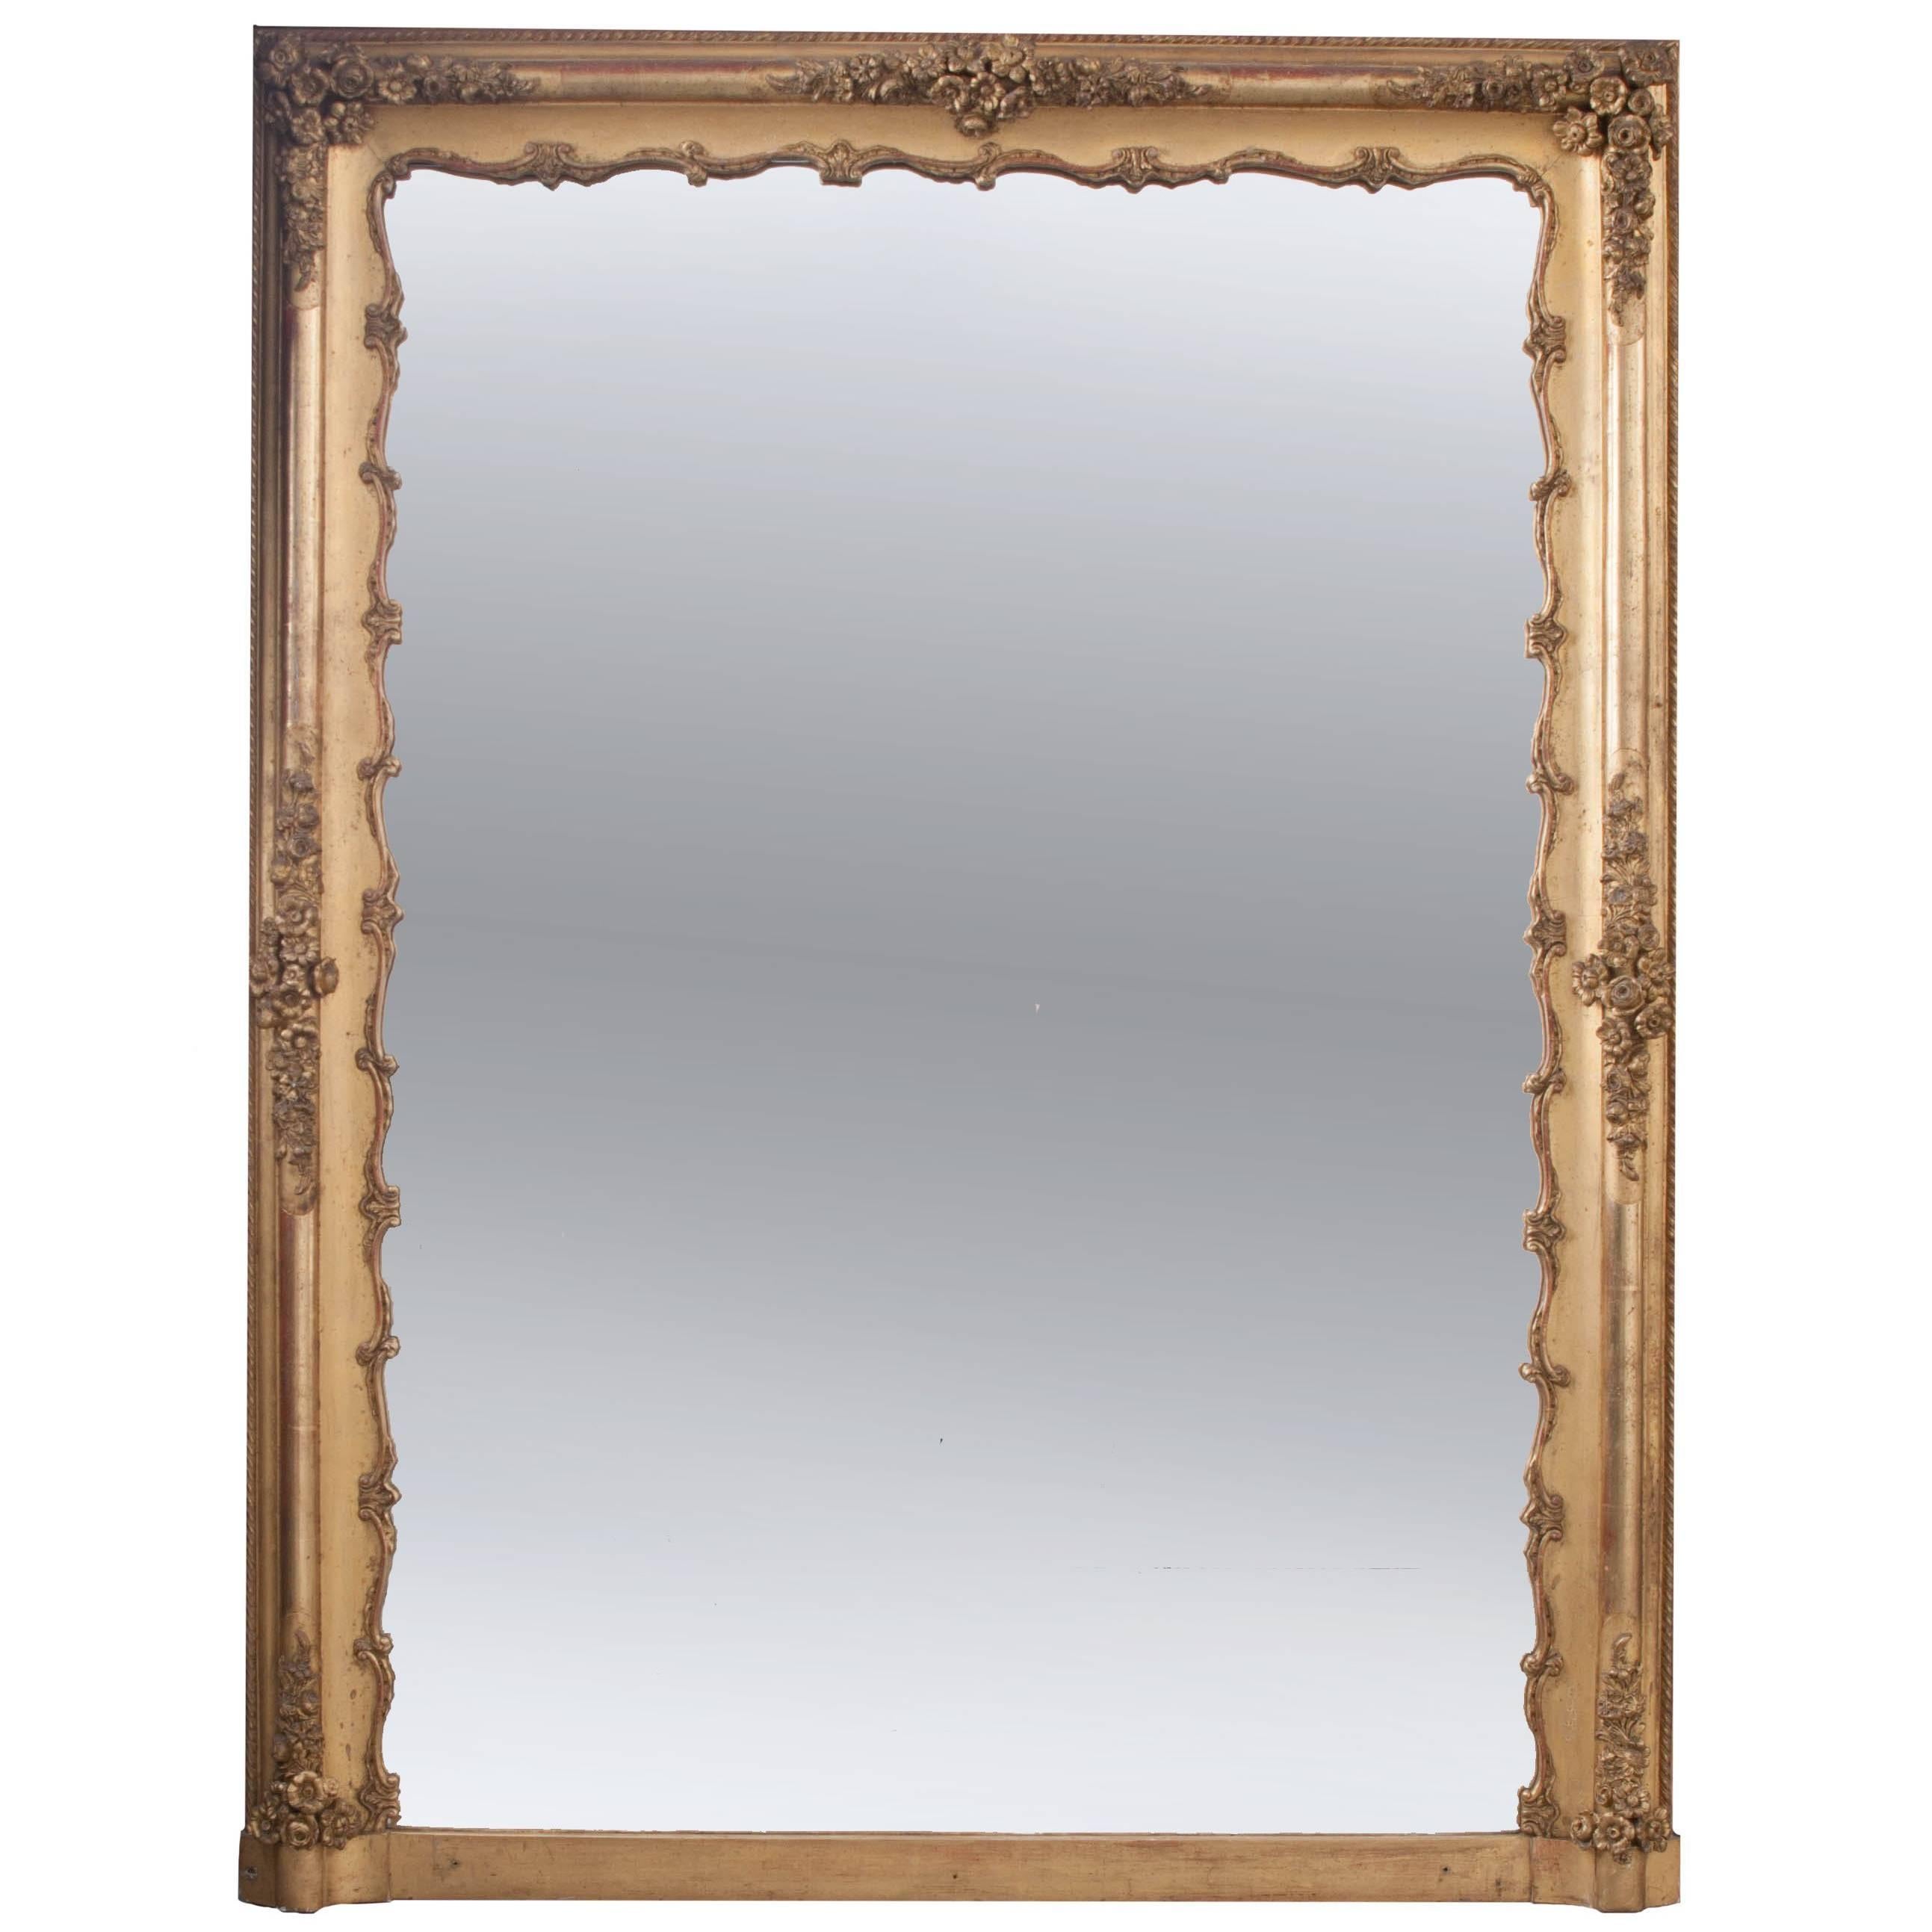 French 19th Century Giltwood Over-Mantle Mirror